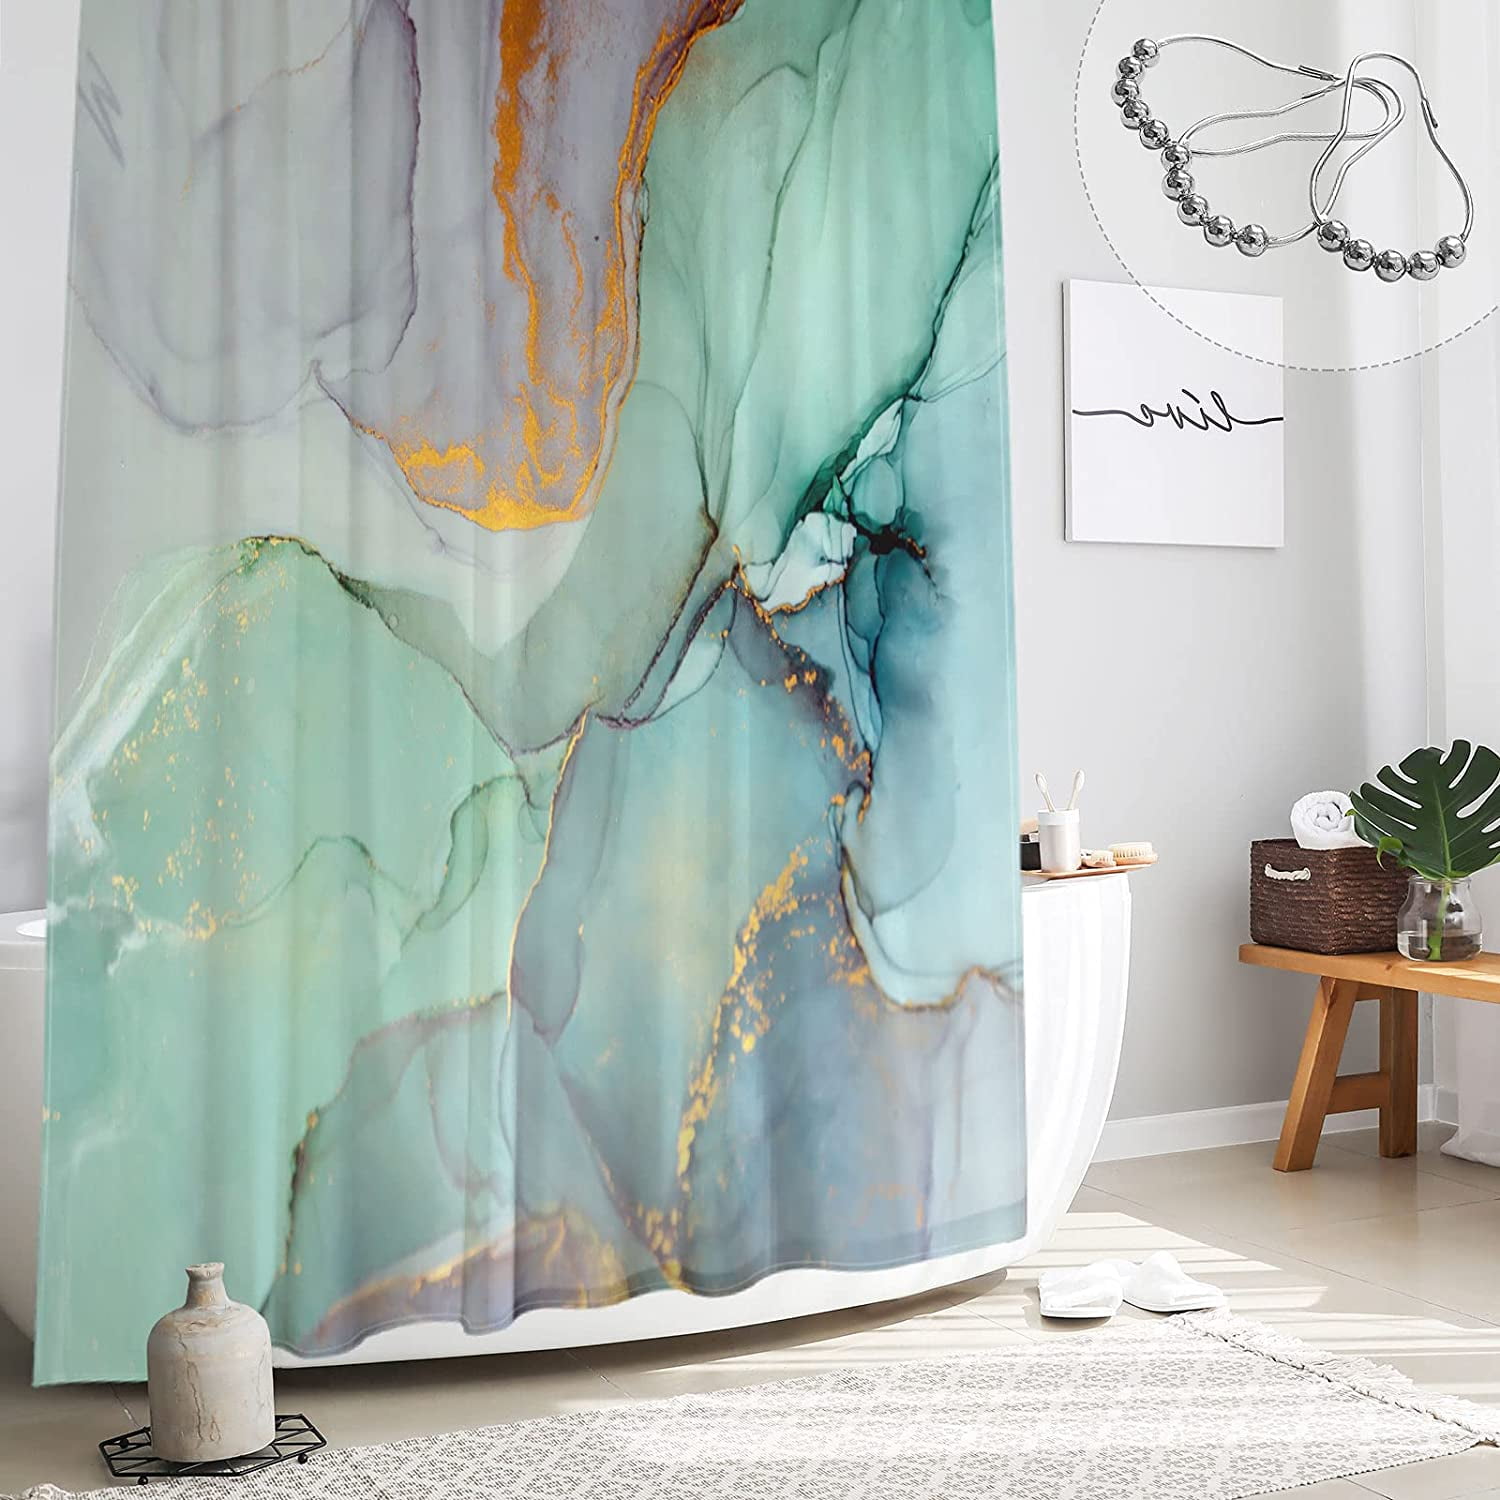 natu2eco Colourful Marble Shower Curtains for Bathroom Sets Fabric with 12 Hooks Watercolor Abstract Ink Paint Blue Green Jade Texture Purple and Gold Stripes Machine Washable Digital Printing Decor